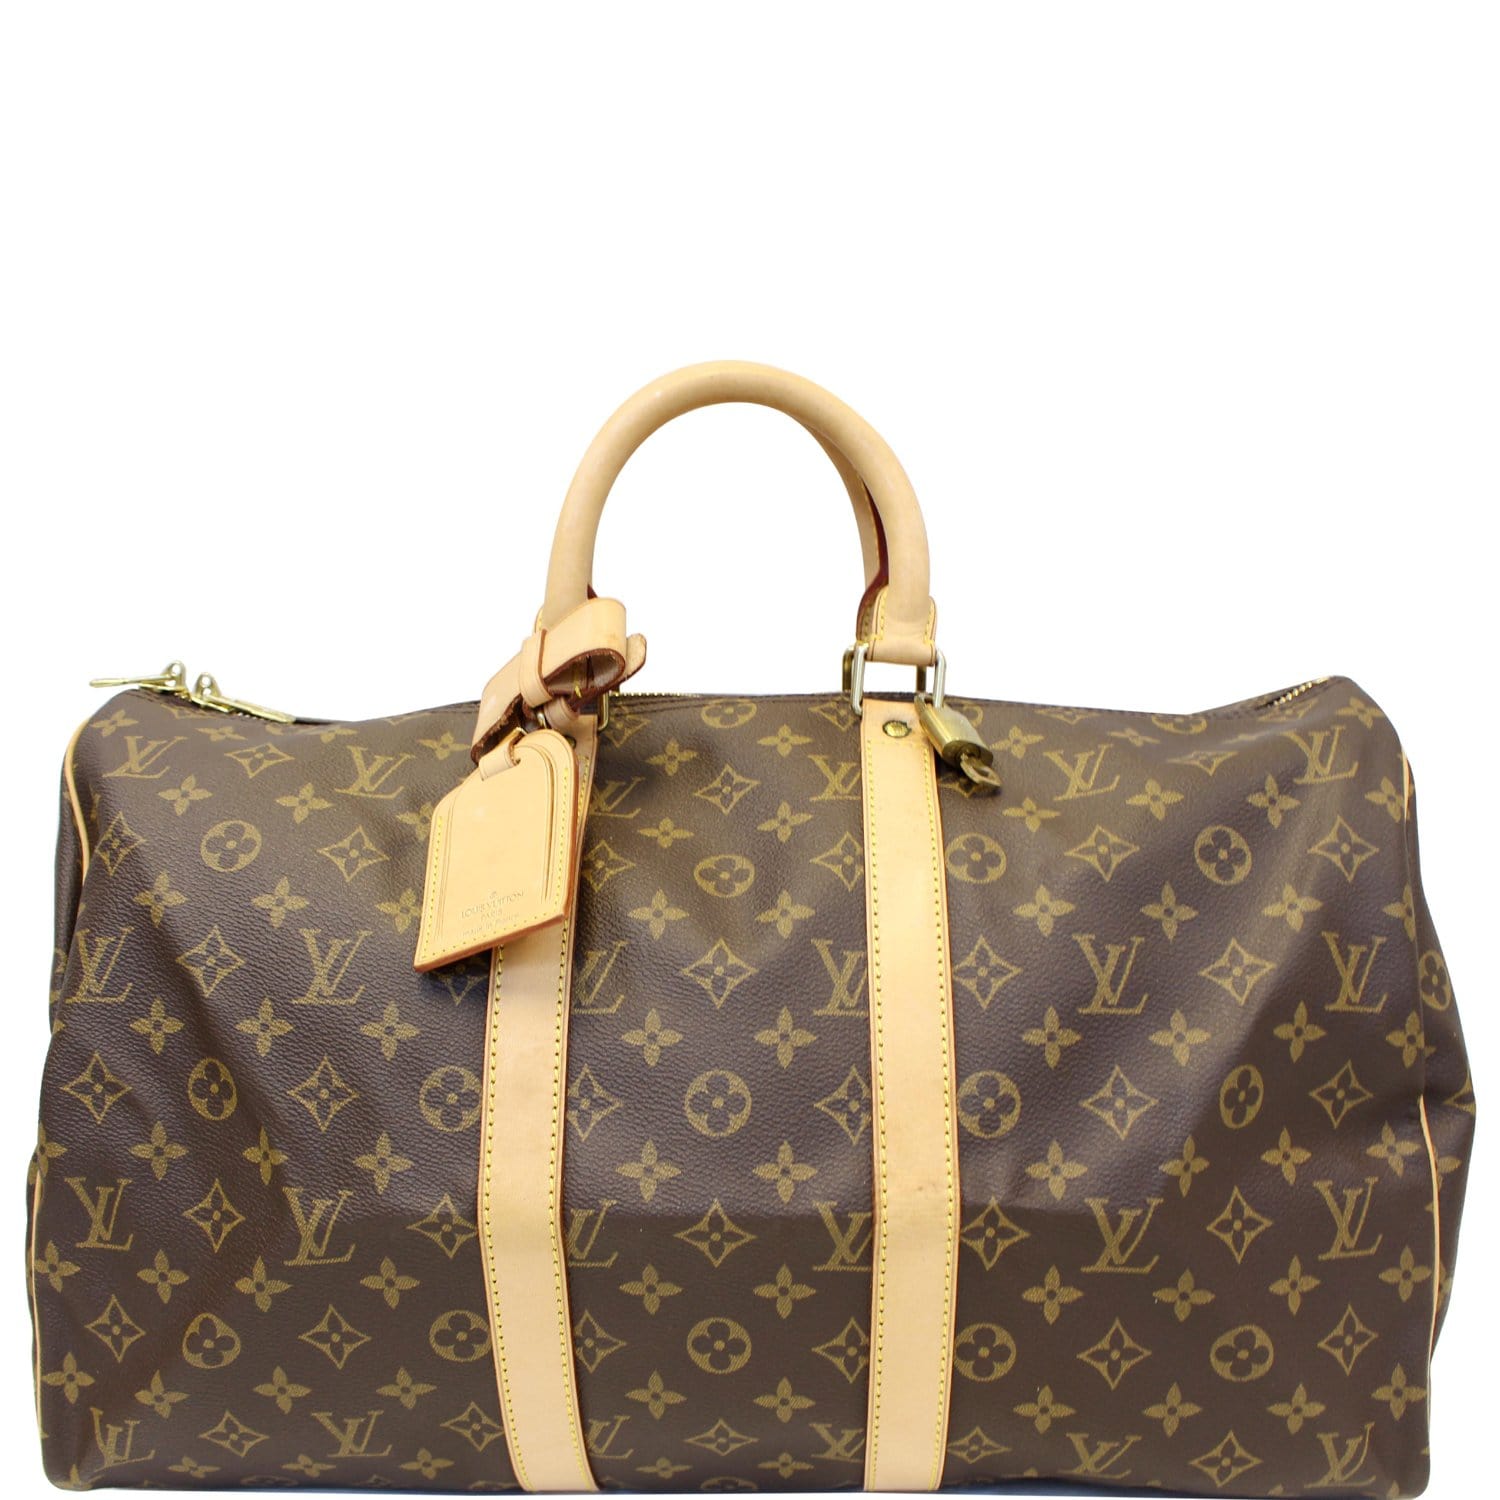 The Ultimate Louis Vuitton Keepall Size Guide: Finding Your